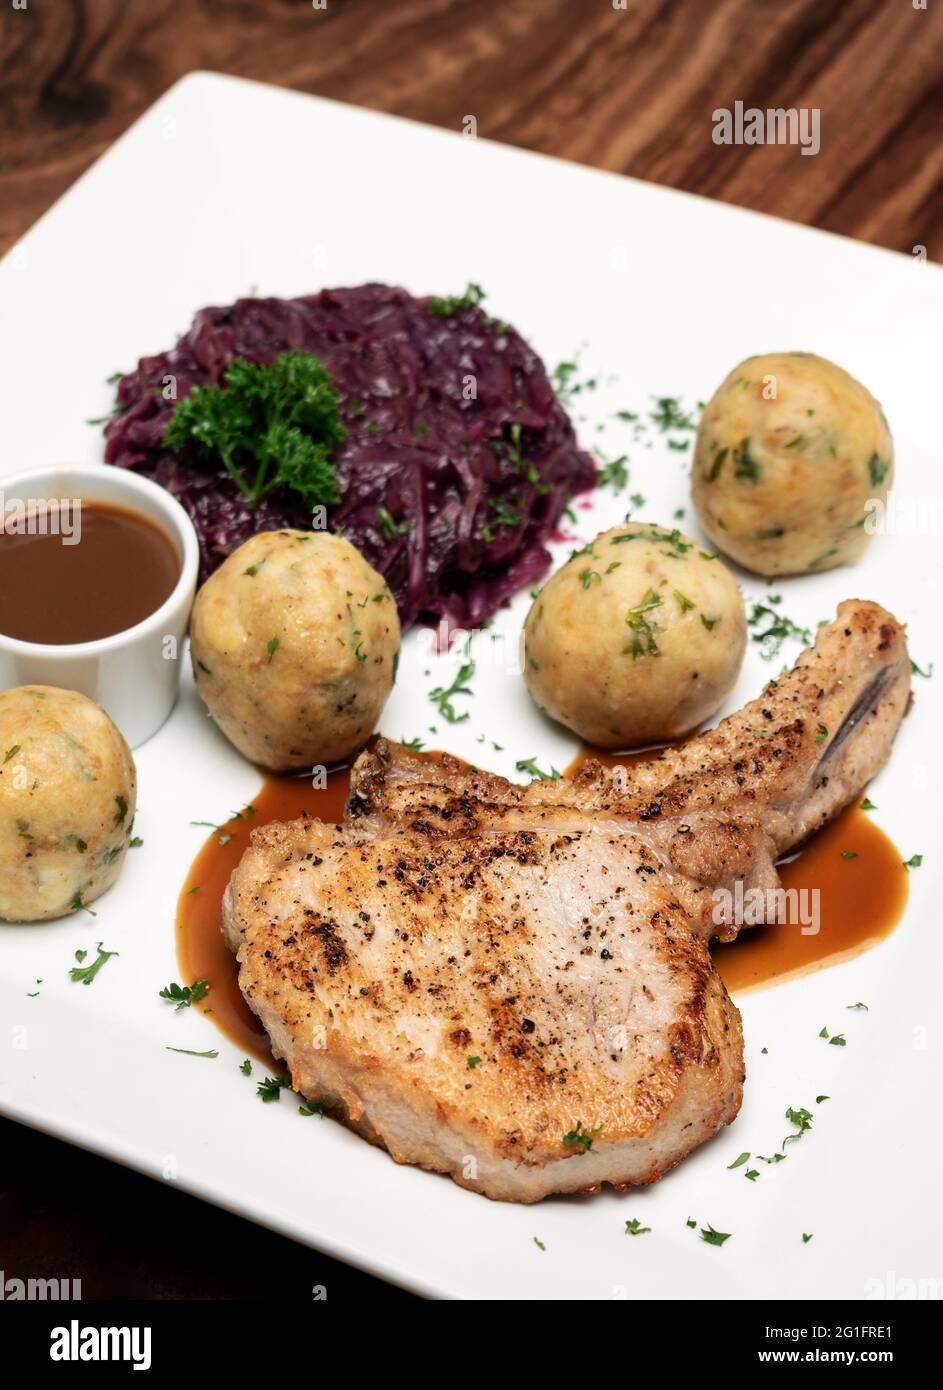 german style grilled pork chop with bread dumplings and red cabbage traditional meal on wood table Stock Photo